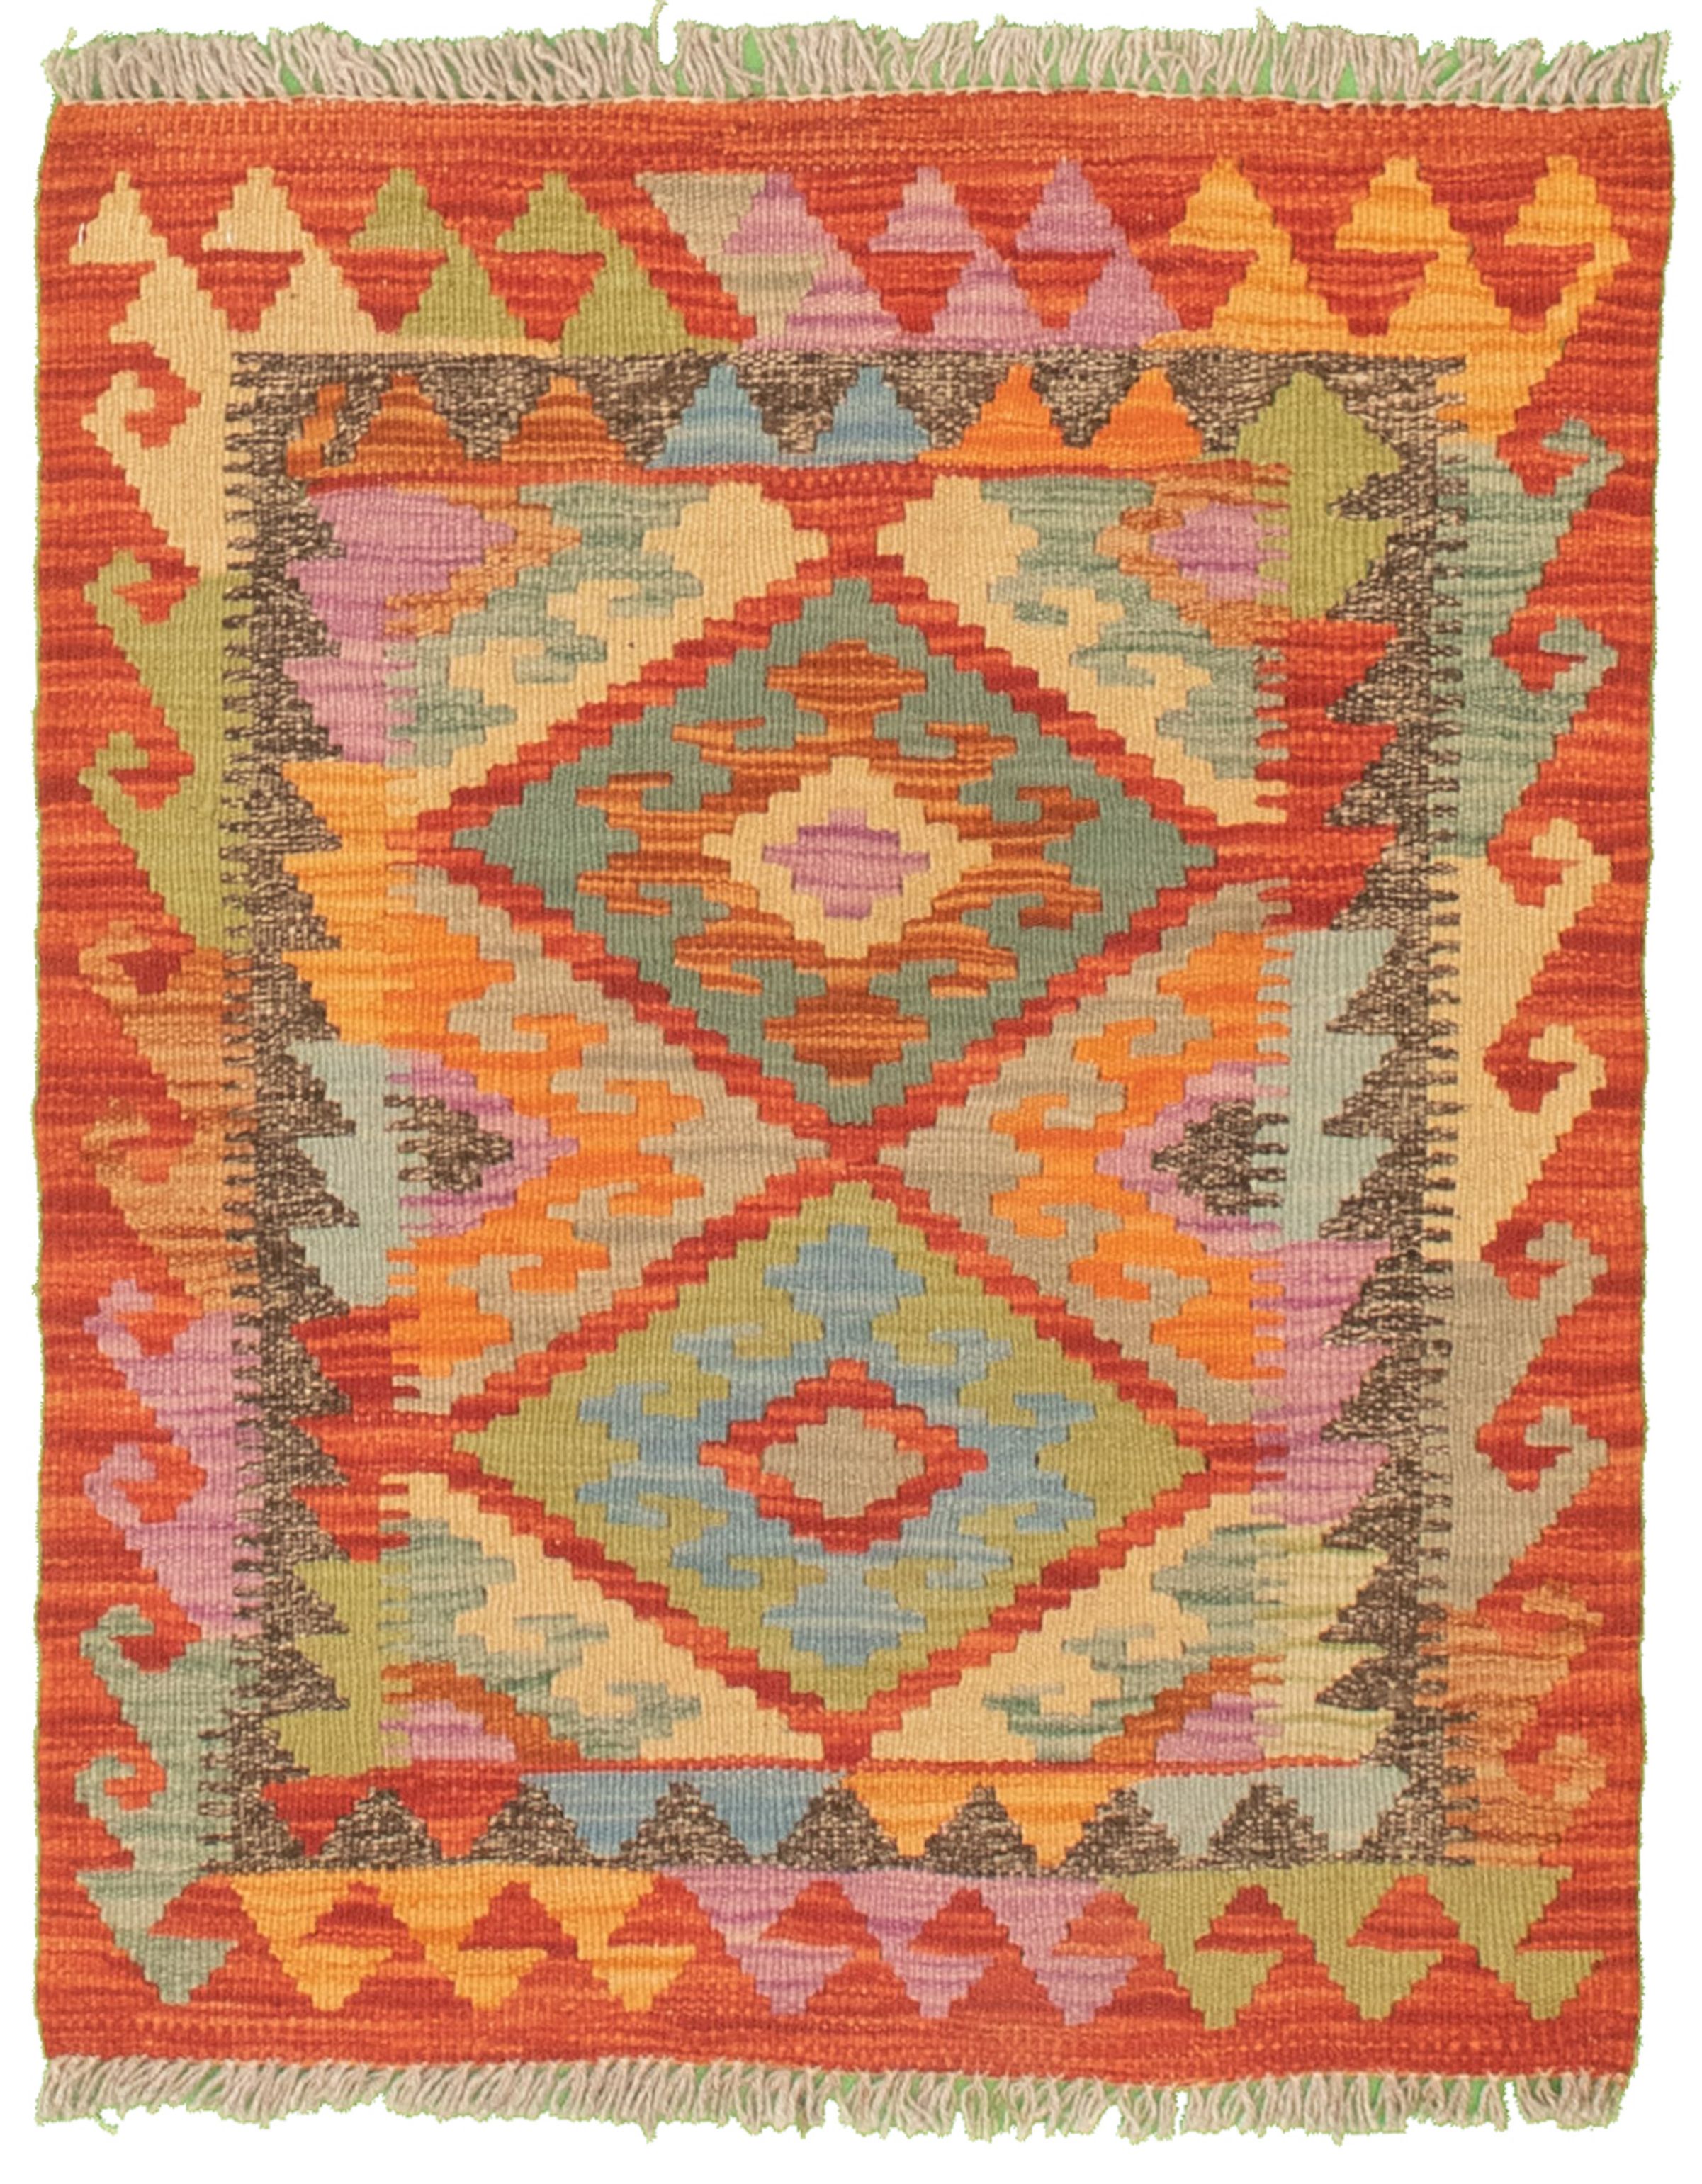 Hand woven Bold and Colorful  Red Cotton Kilim 2'2" x 2'8" Size: 2'2" x 2'8"  